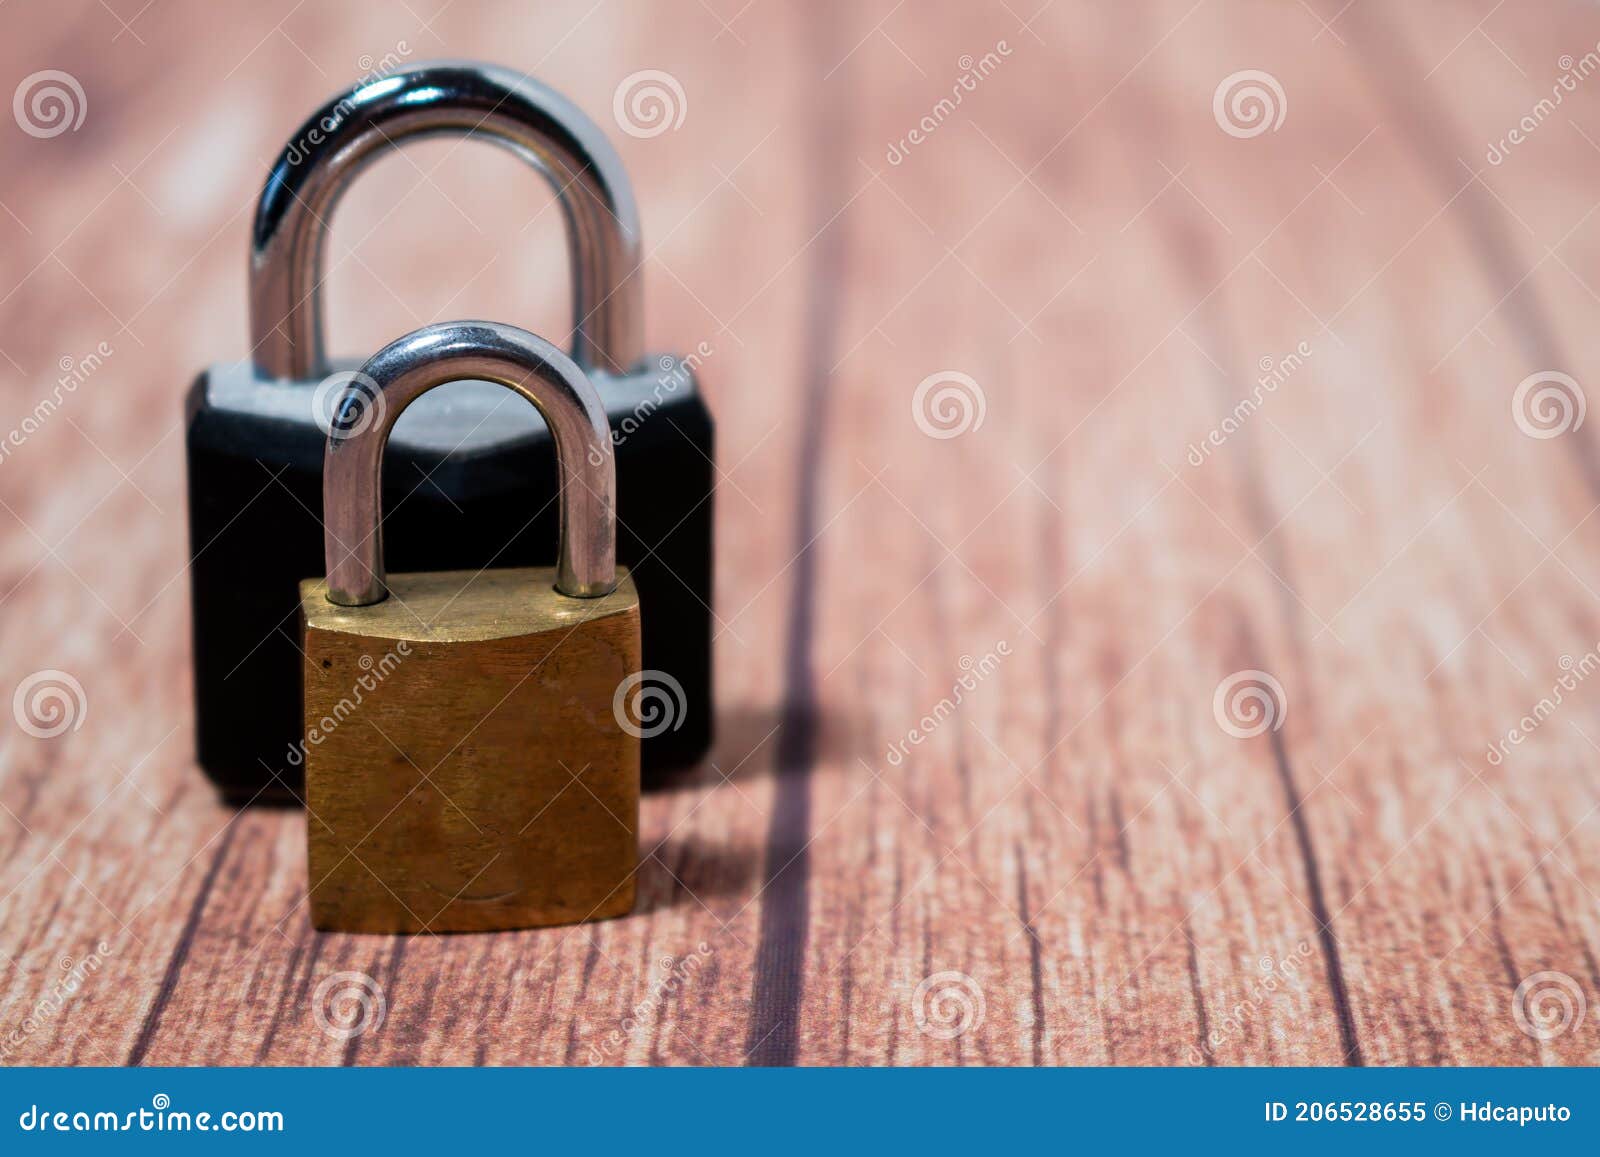 classic golden bronze padlock and black steel and iron padlock. space for writing. wooden background